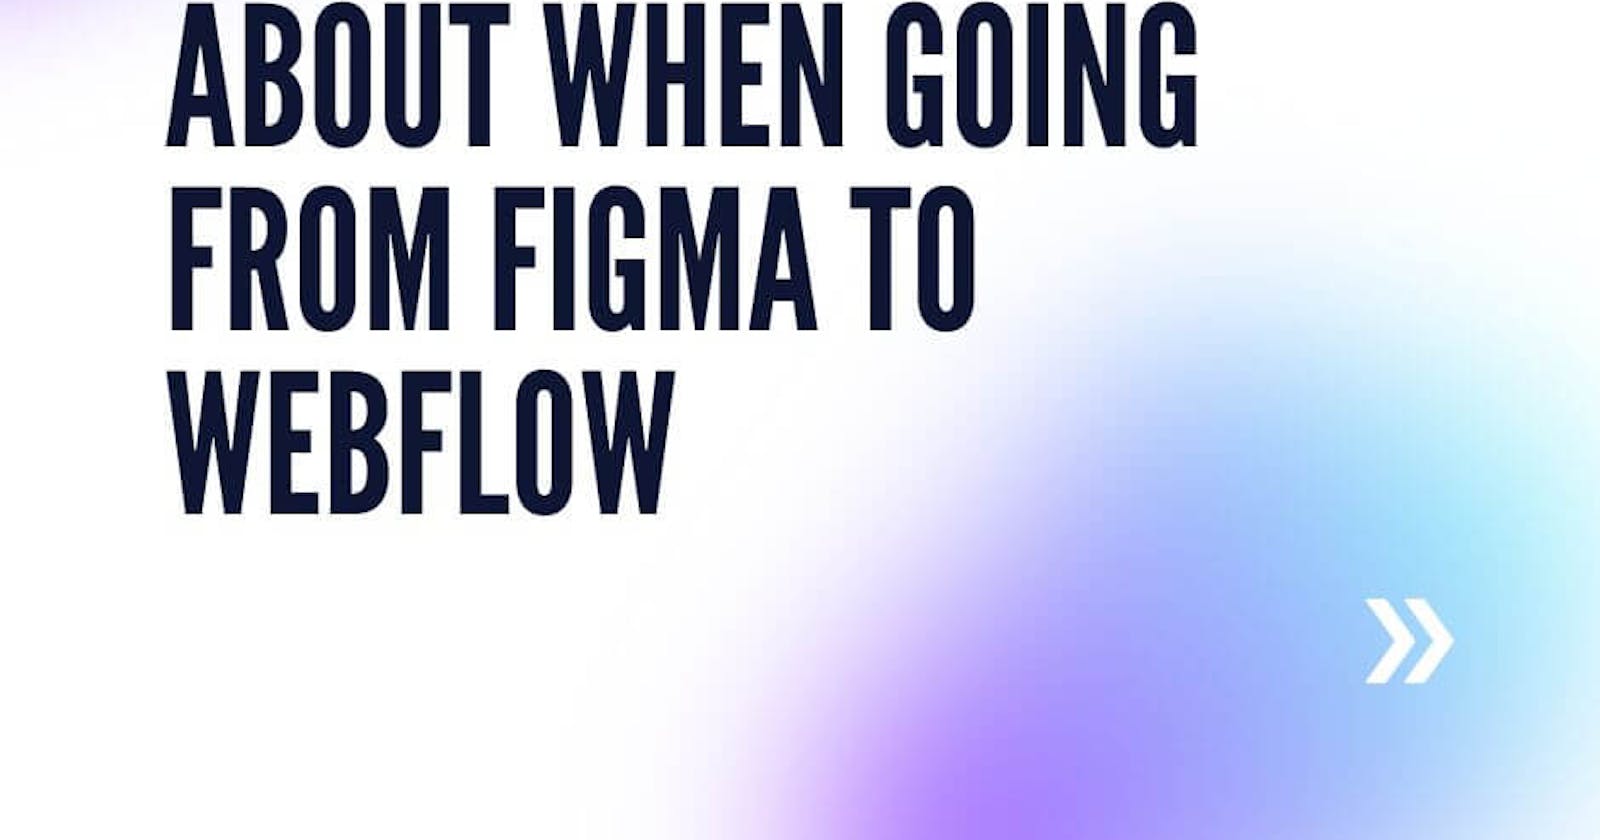 Things to think about when going from Figma to Webflow